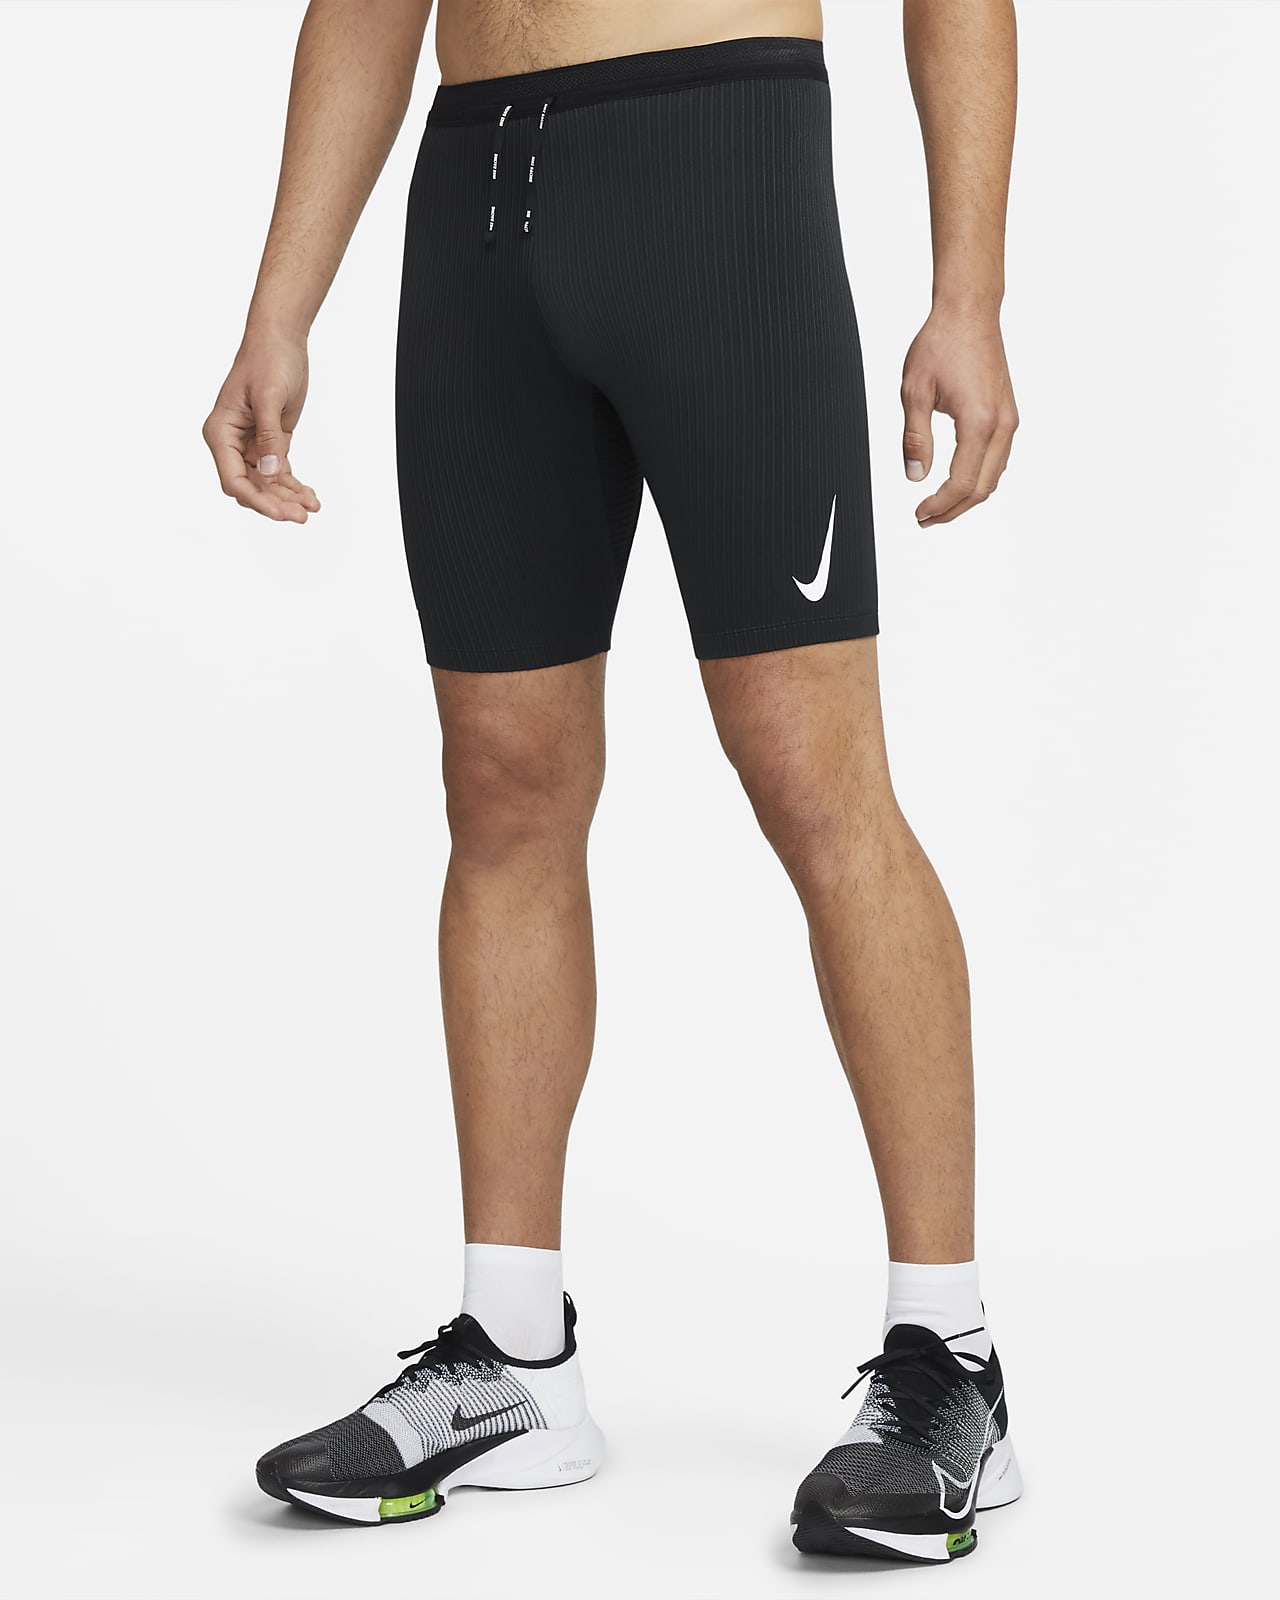 Short Tights Mens Clearance | www.dvhh.org